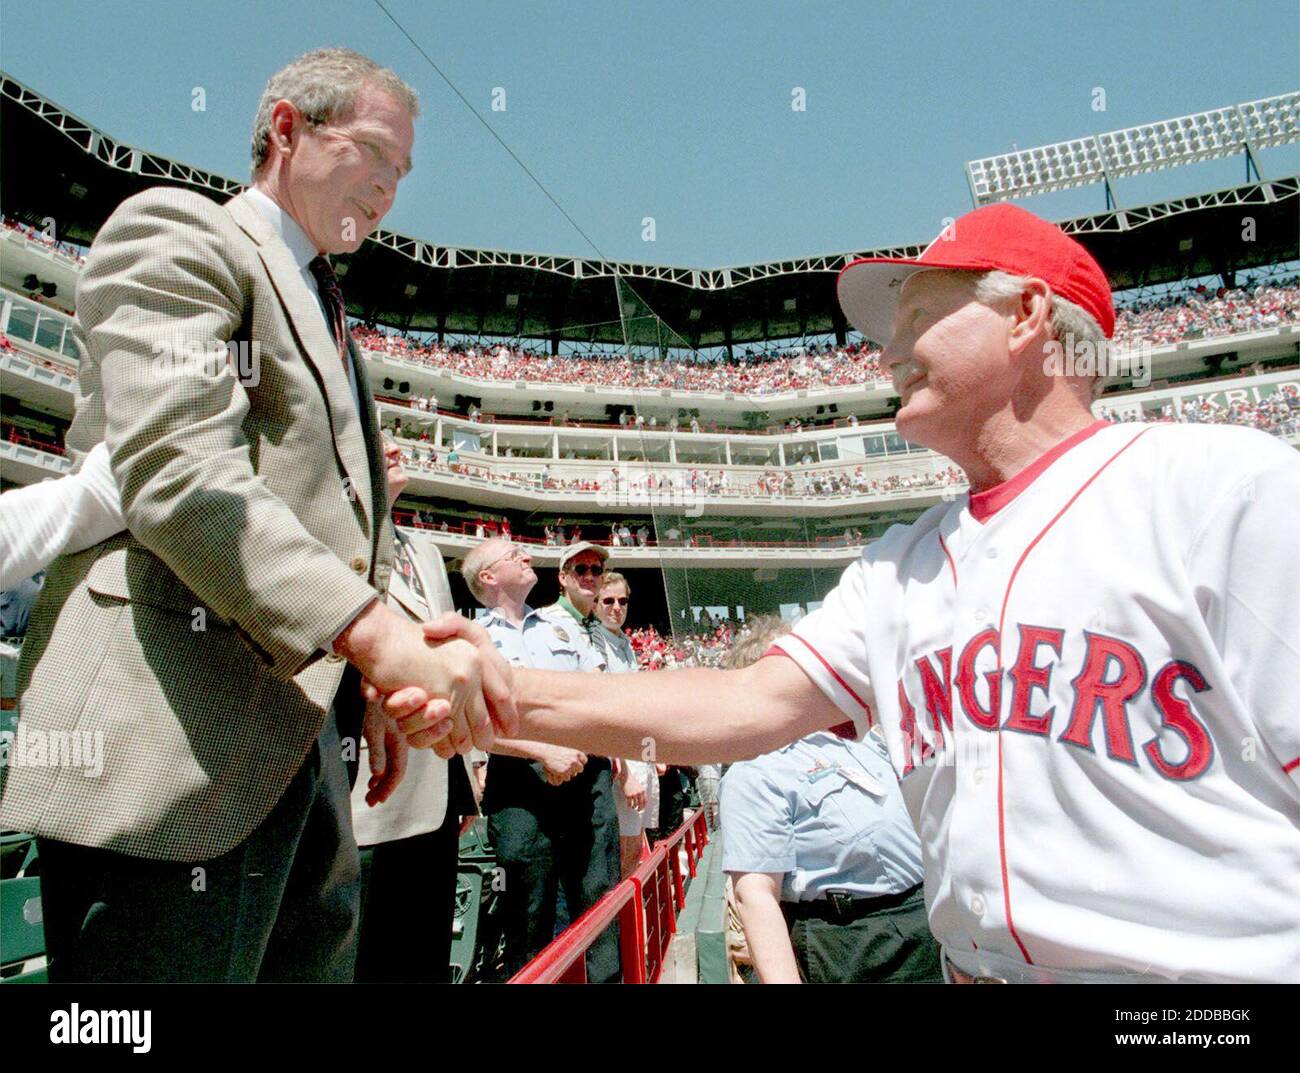 NO FILM, NO VIDEO, NO TV, NO DOCUMENTARY - Governor George W. Bush and Manager Johnny Oates shake hands before the opening day game. Texas Rangers vs. Detroit Tigers, opening game for the 1999 season at The Ballpark in Arlington on April 5, 1999. Photo by Rick Moon/Fort Worth Star-Telegram/KRT/ABACA. Stock Photo